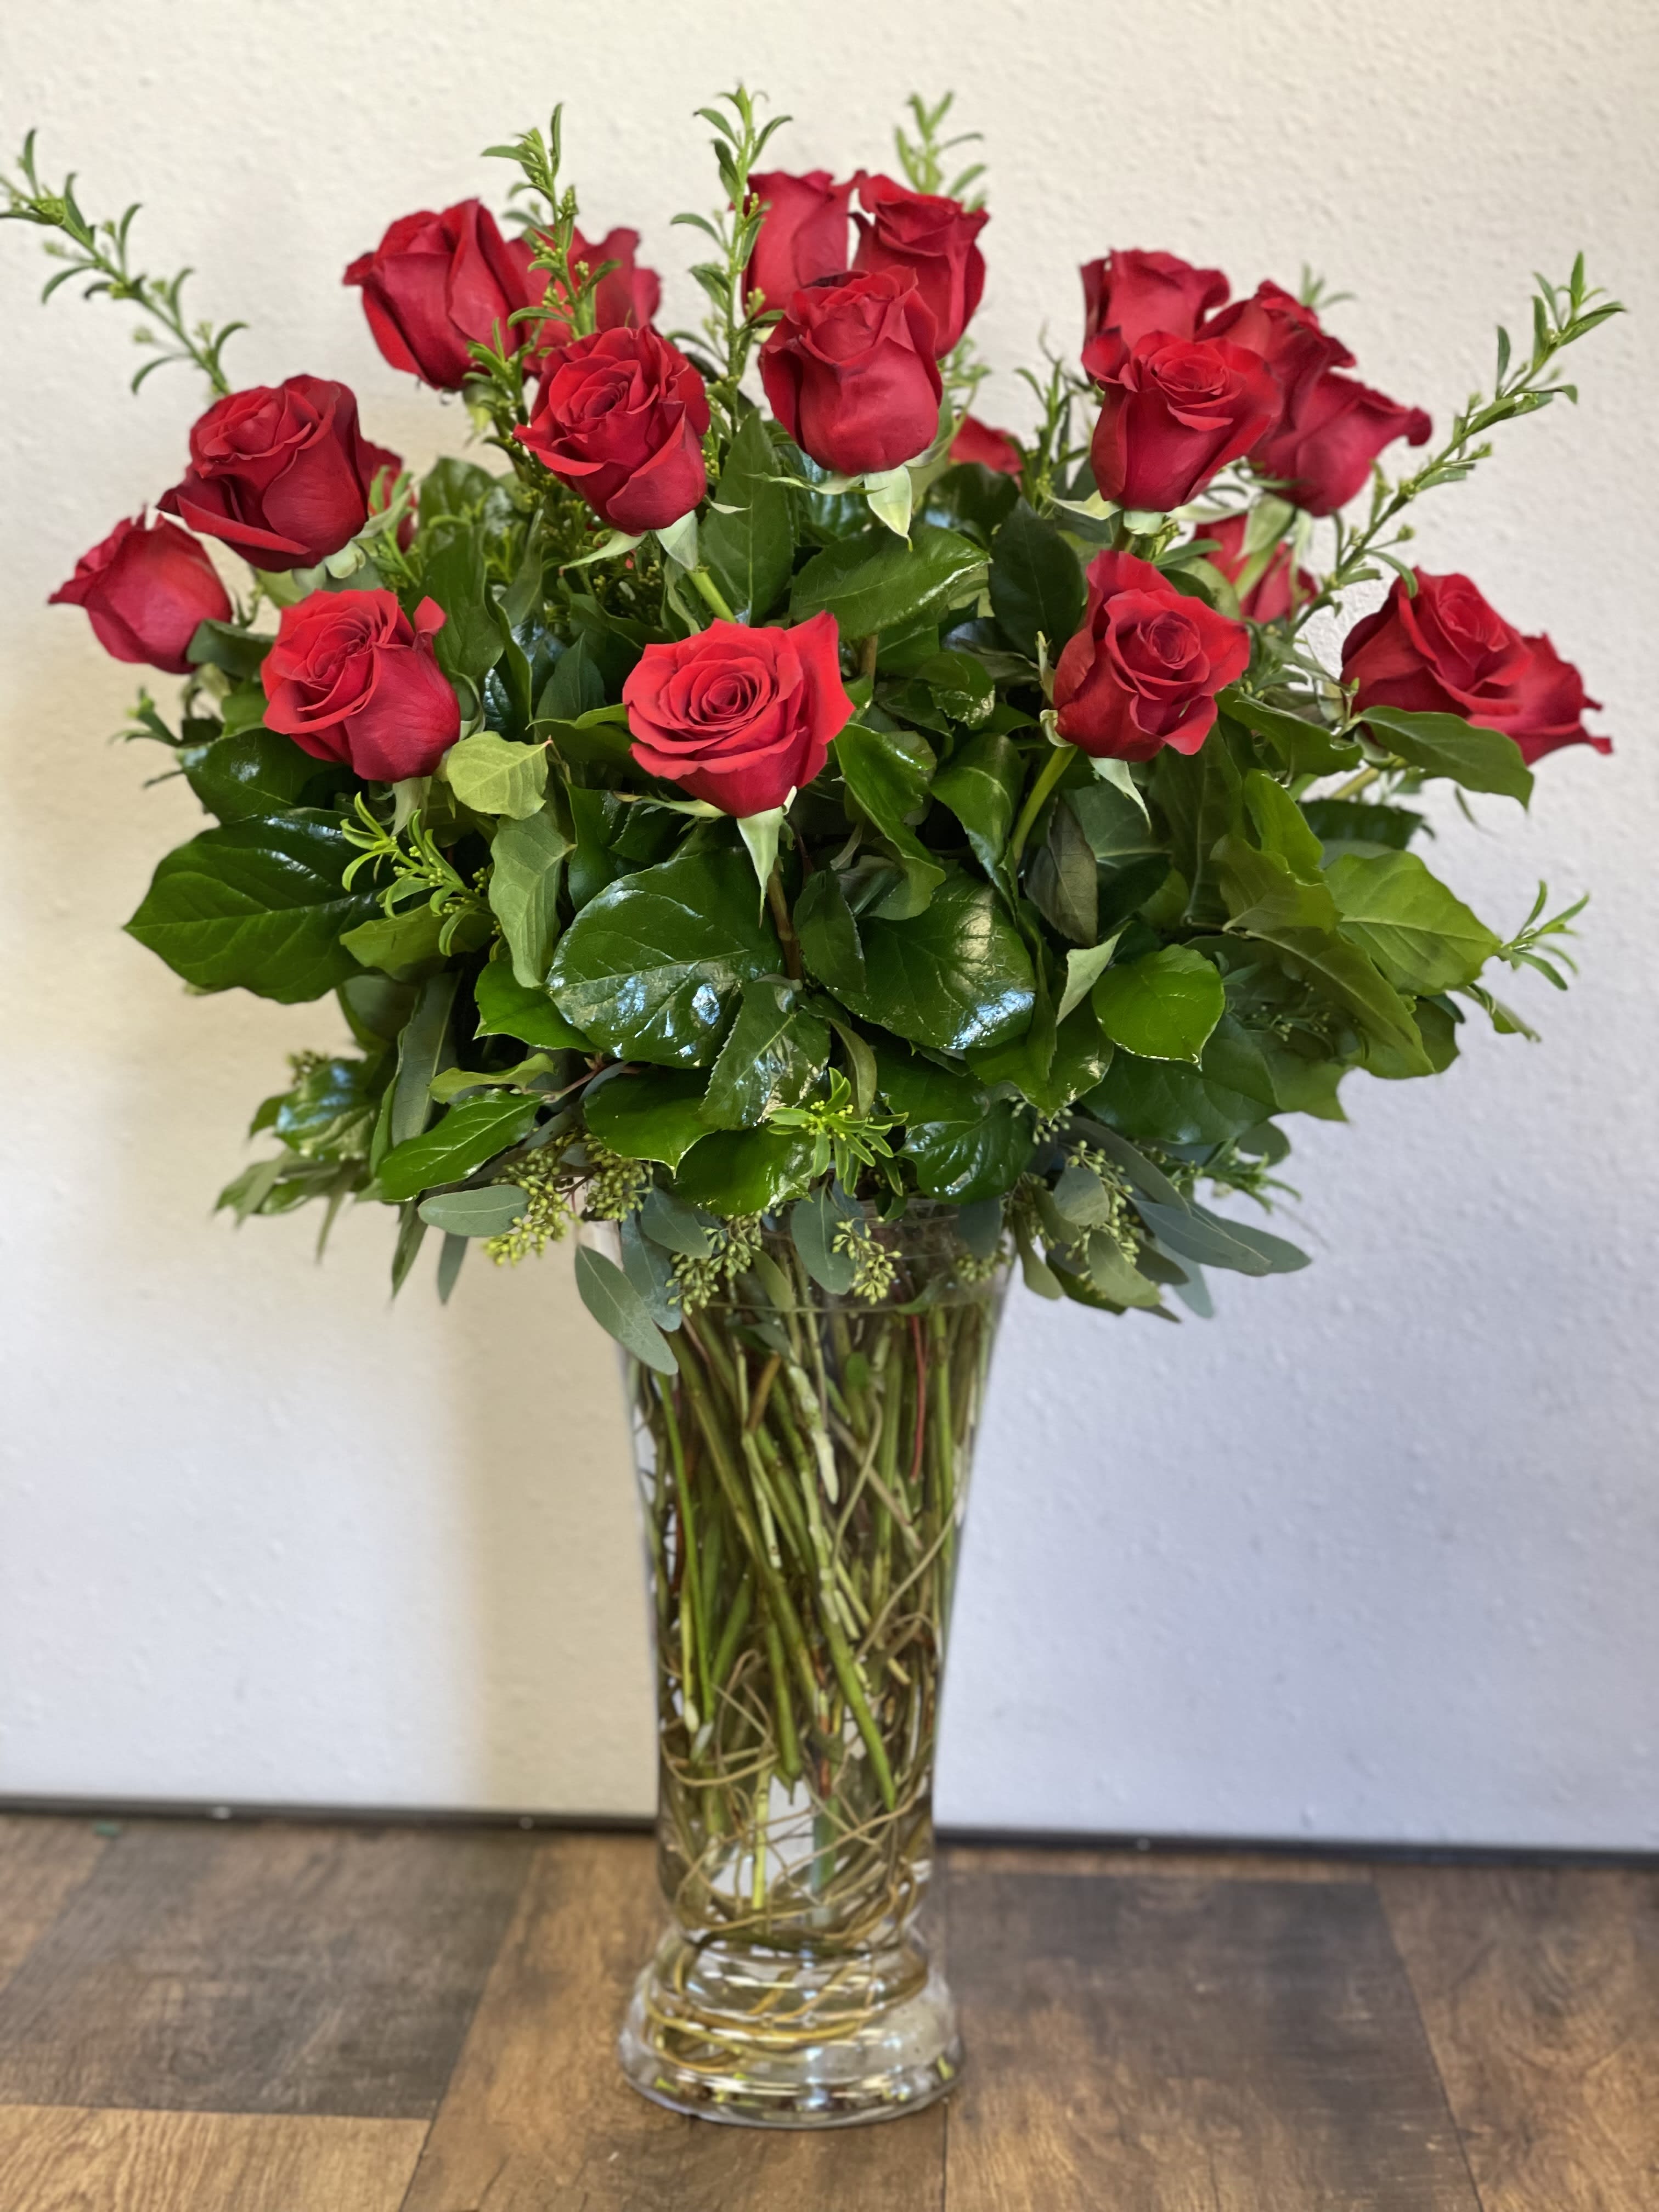 Classic Tall Rose Arrangement - Premium tall Ecuadorian Roses in elegant tall glass vase with greens and fillers 1 dozen Rose arrangement is standard **Photo shown is a 2 dozen Red Roses** ** Deluxe is 2 dozen Red Roses** ** Premium is 3 Dozen Red Roses**  If you prefer a different color please specify in the Comment section.   